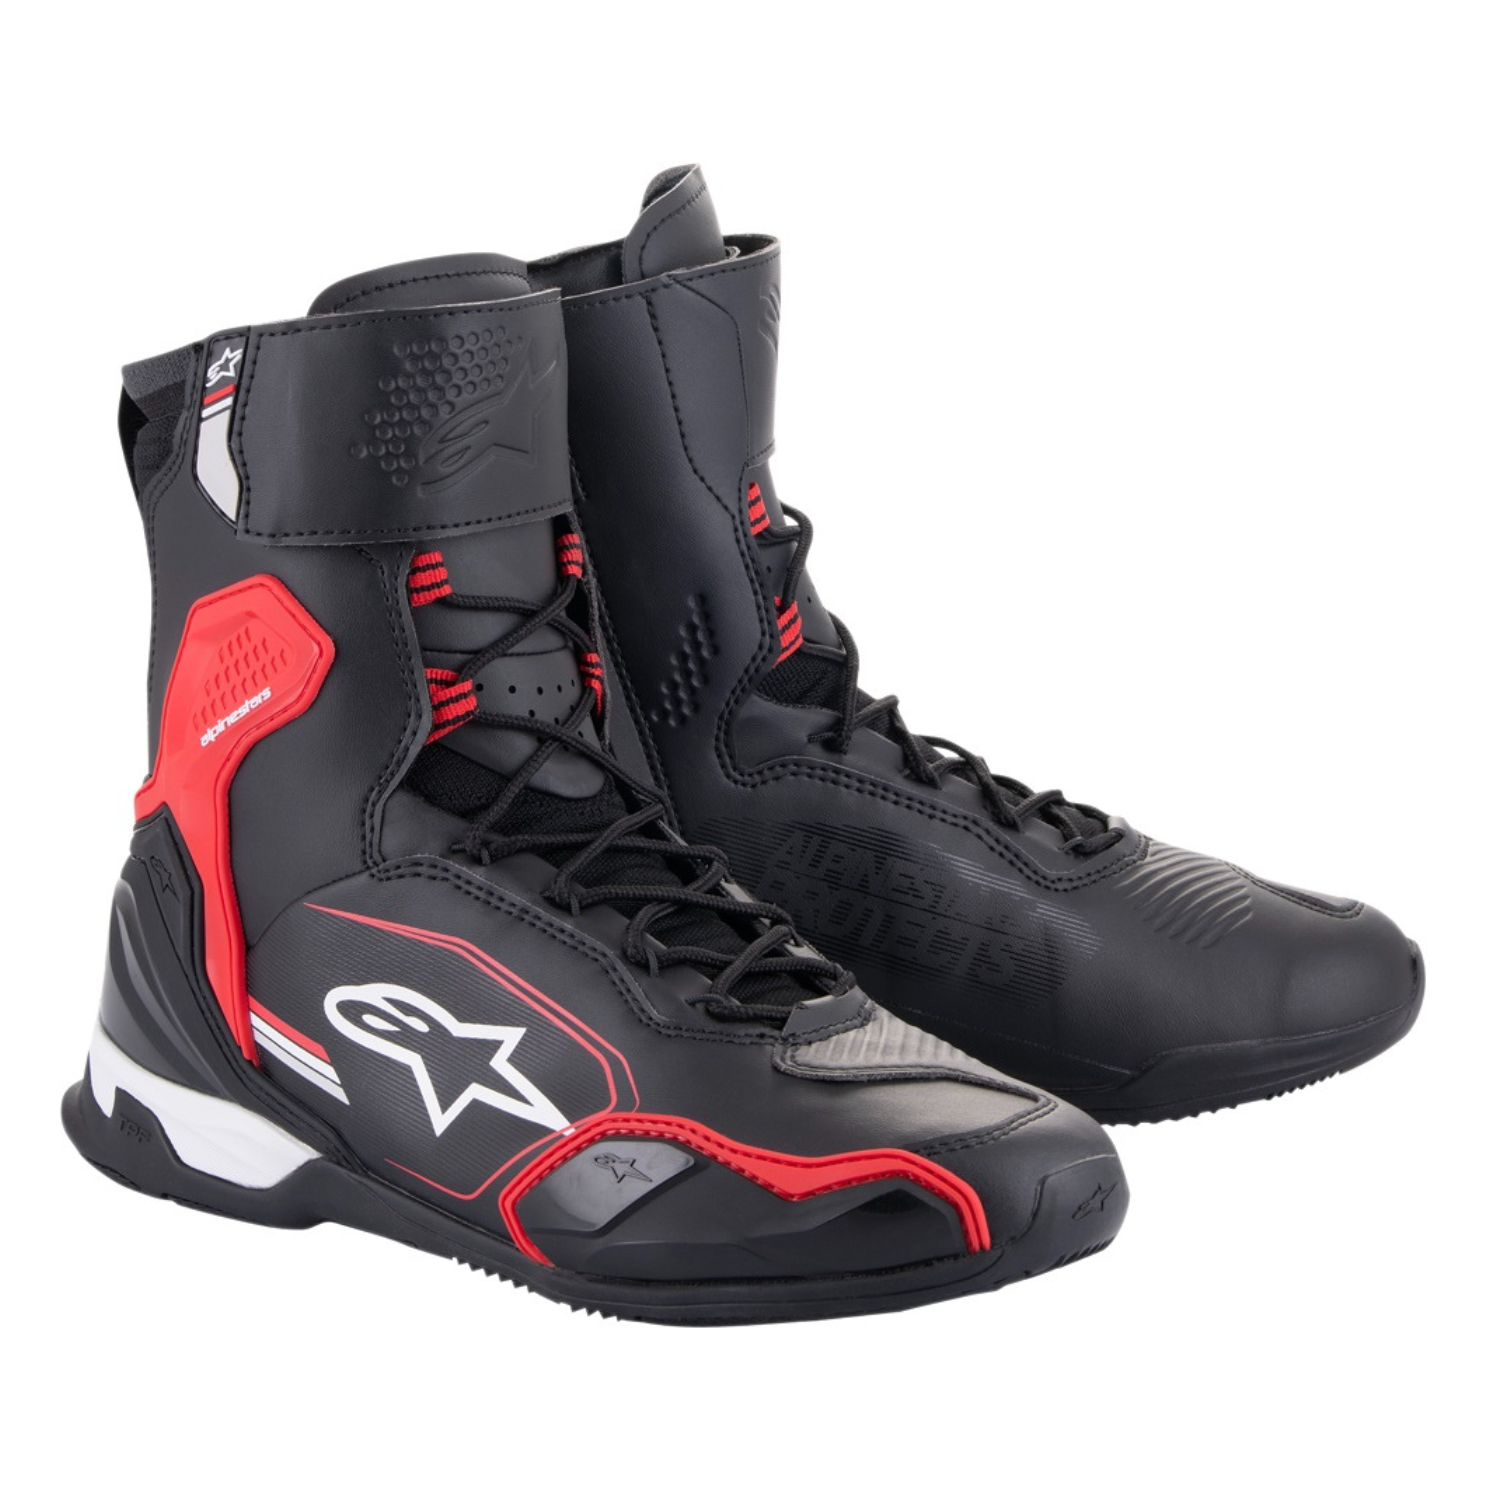 Image of EU Alpinestars Superfaster Shoes Black Bright Red White Taille US 12